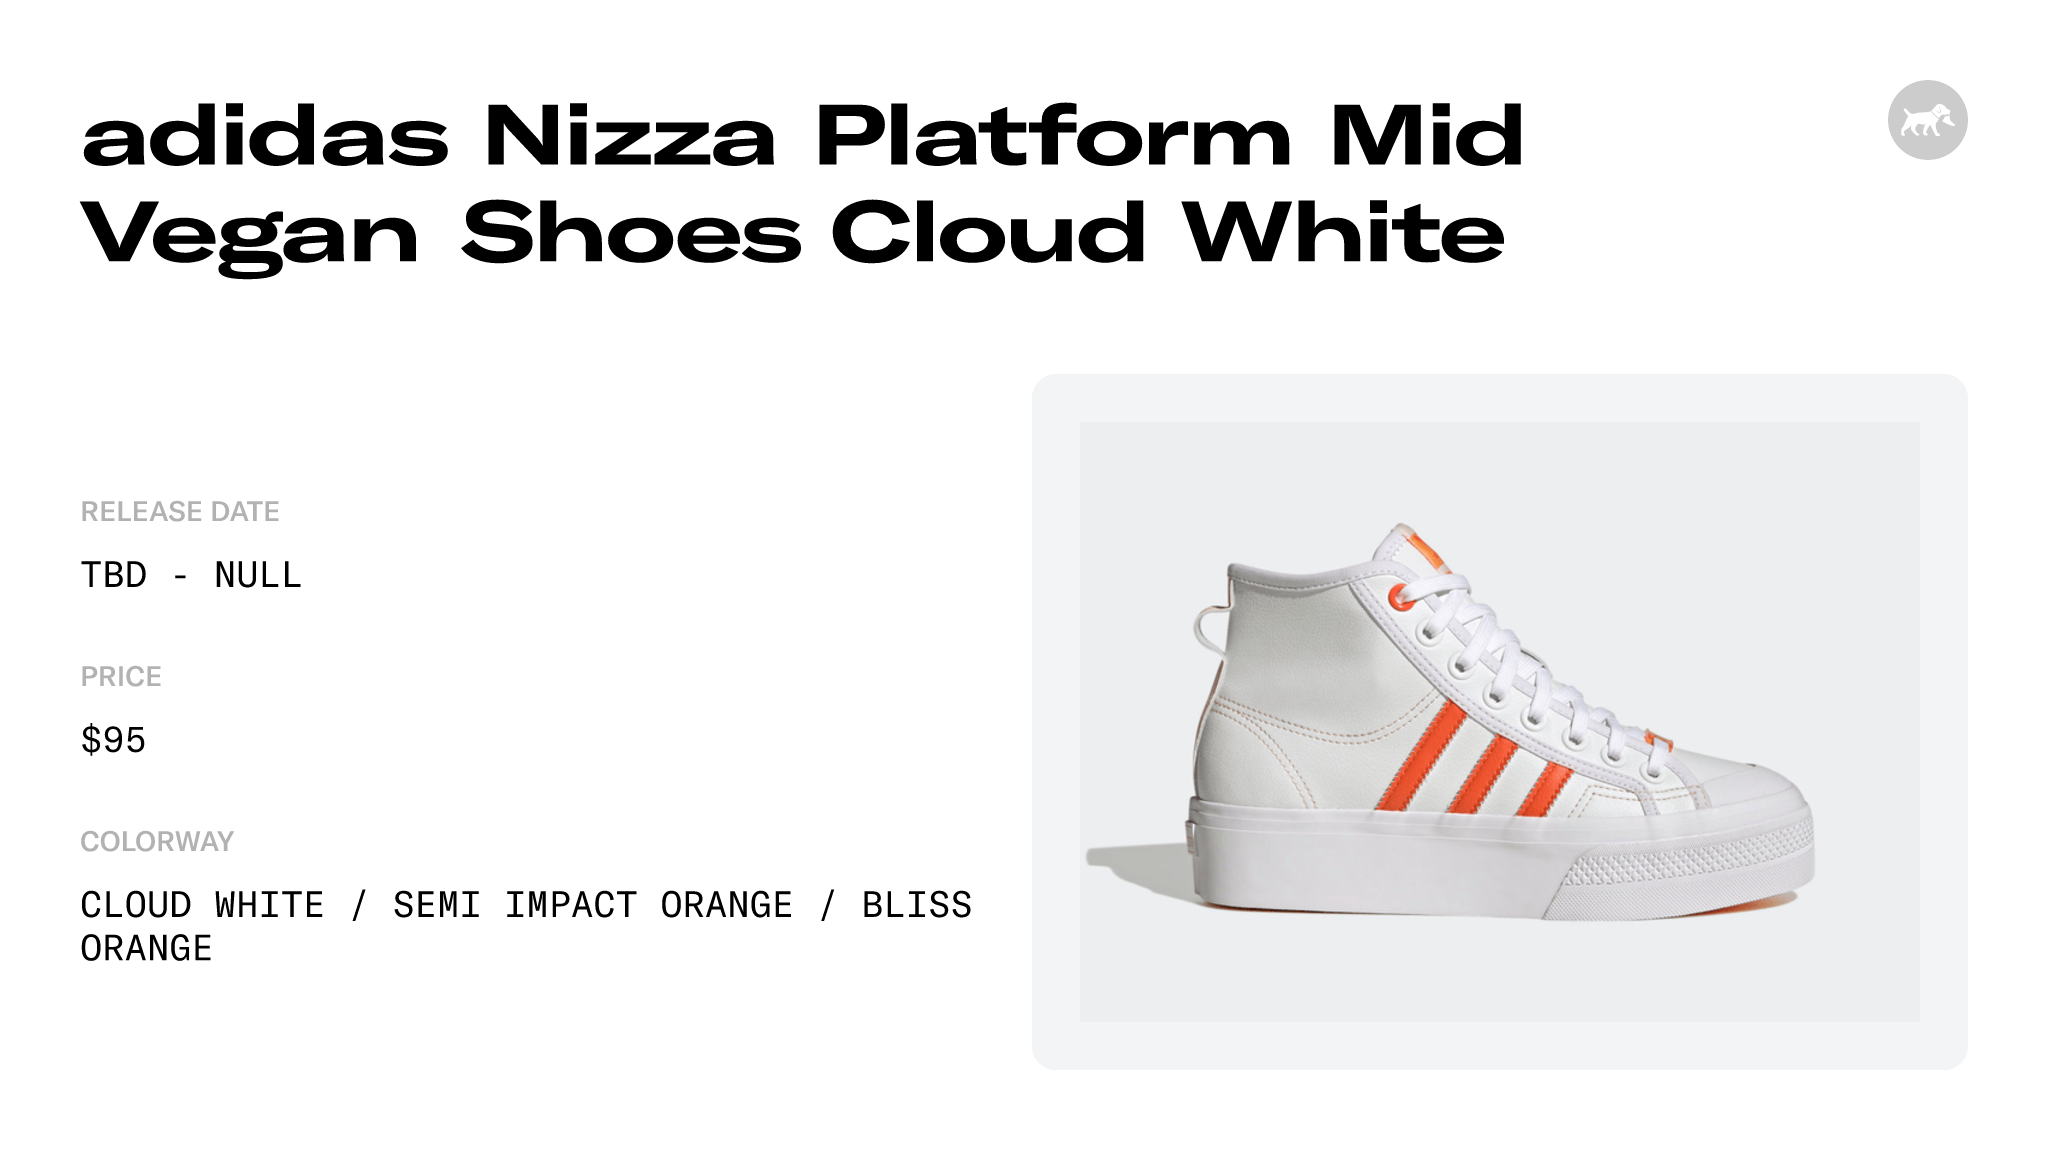 adidas Nizza Platform Mid Vegan Shoes Cloud White - GY1897 Raffles and  Release Date